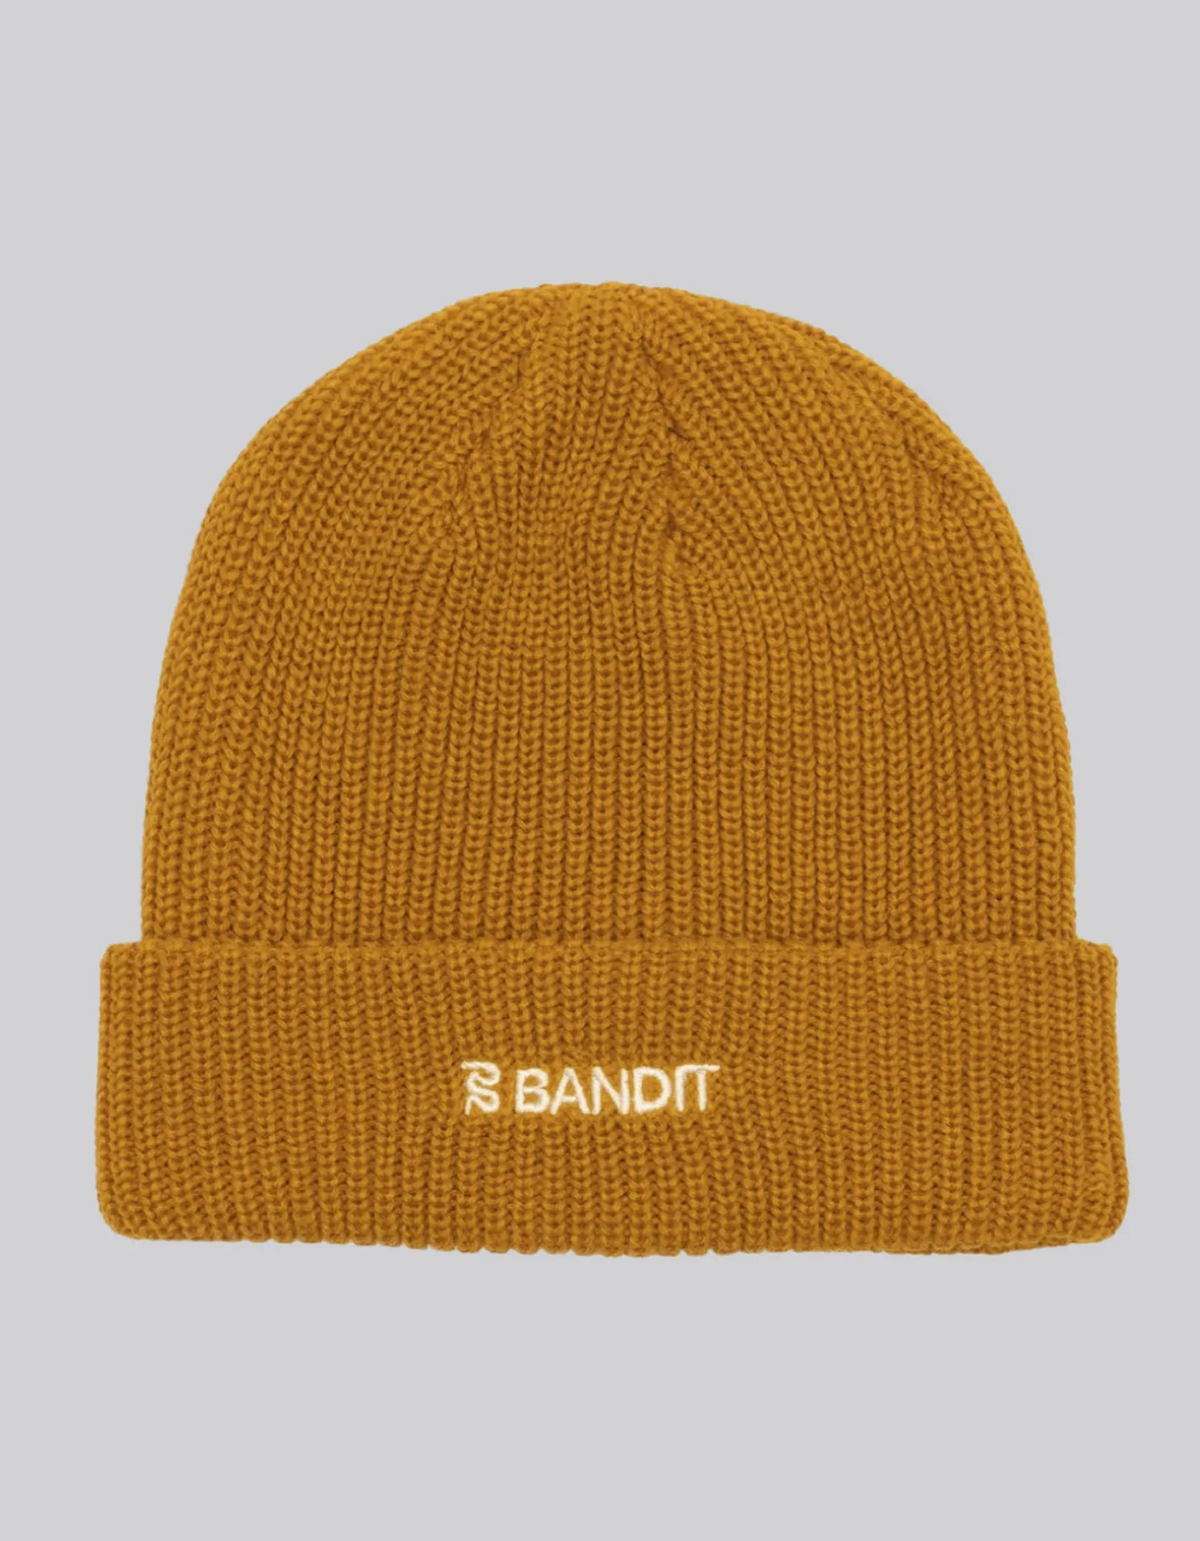 THE CLASSIC BEANIE - GOLDEN HOUR